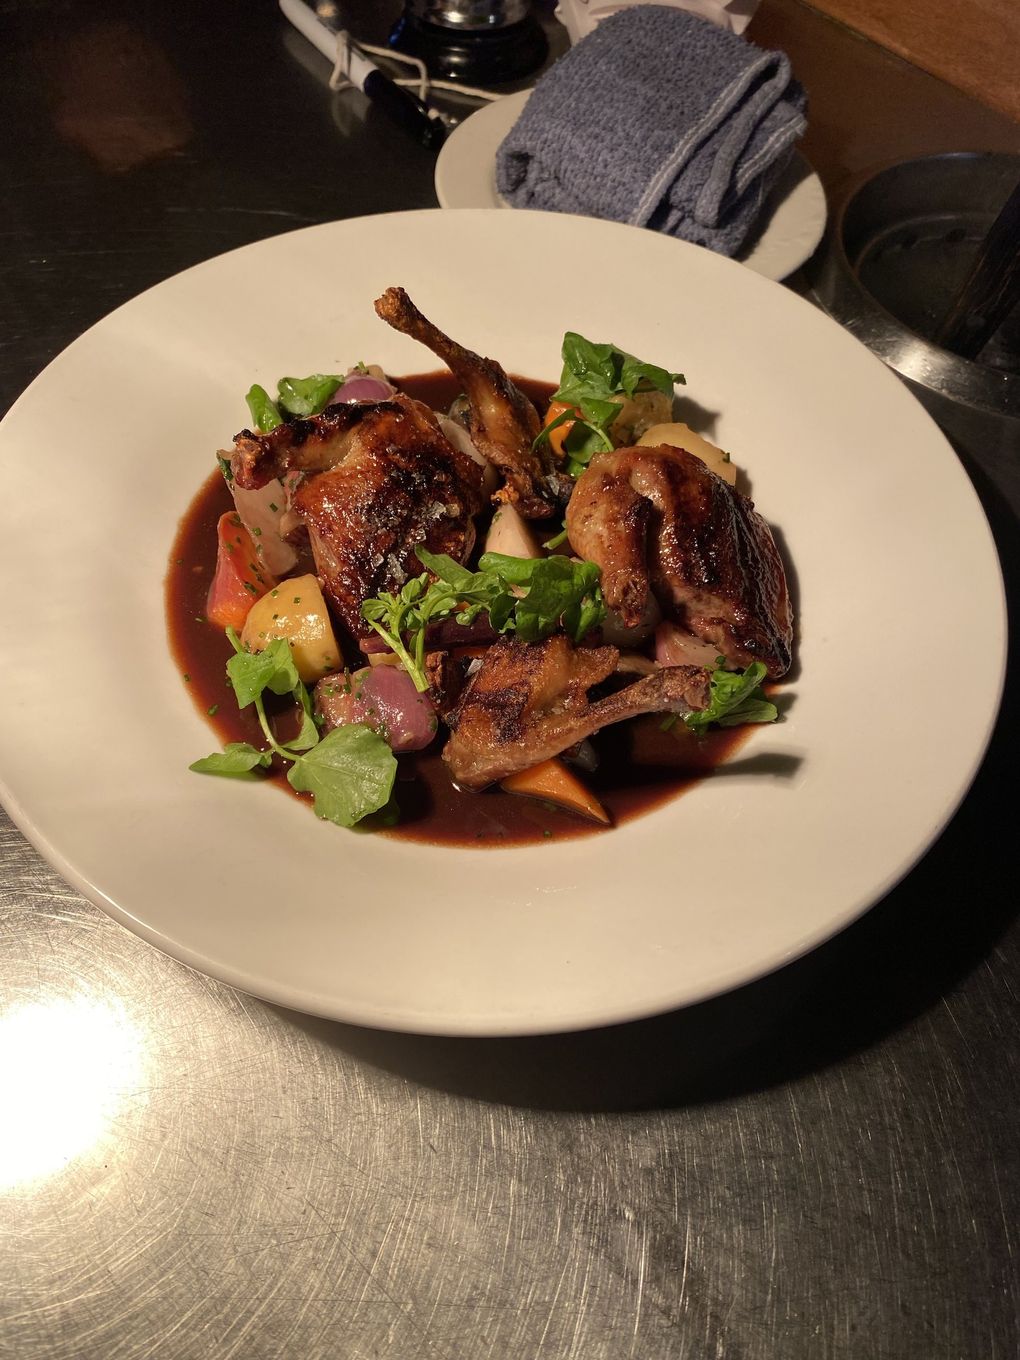 Squab au Vin, L’Oursin: This tasty bird has a little barbecue flavor after being finished over a yakitori grill. It tastes like a smoked Peruvian guinea pig. (Courtesy L’Oursin)